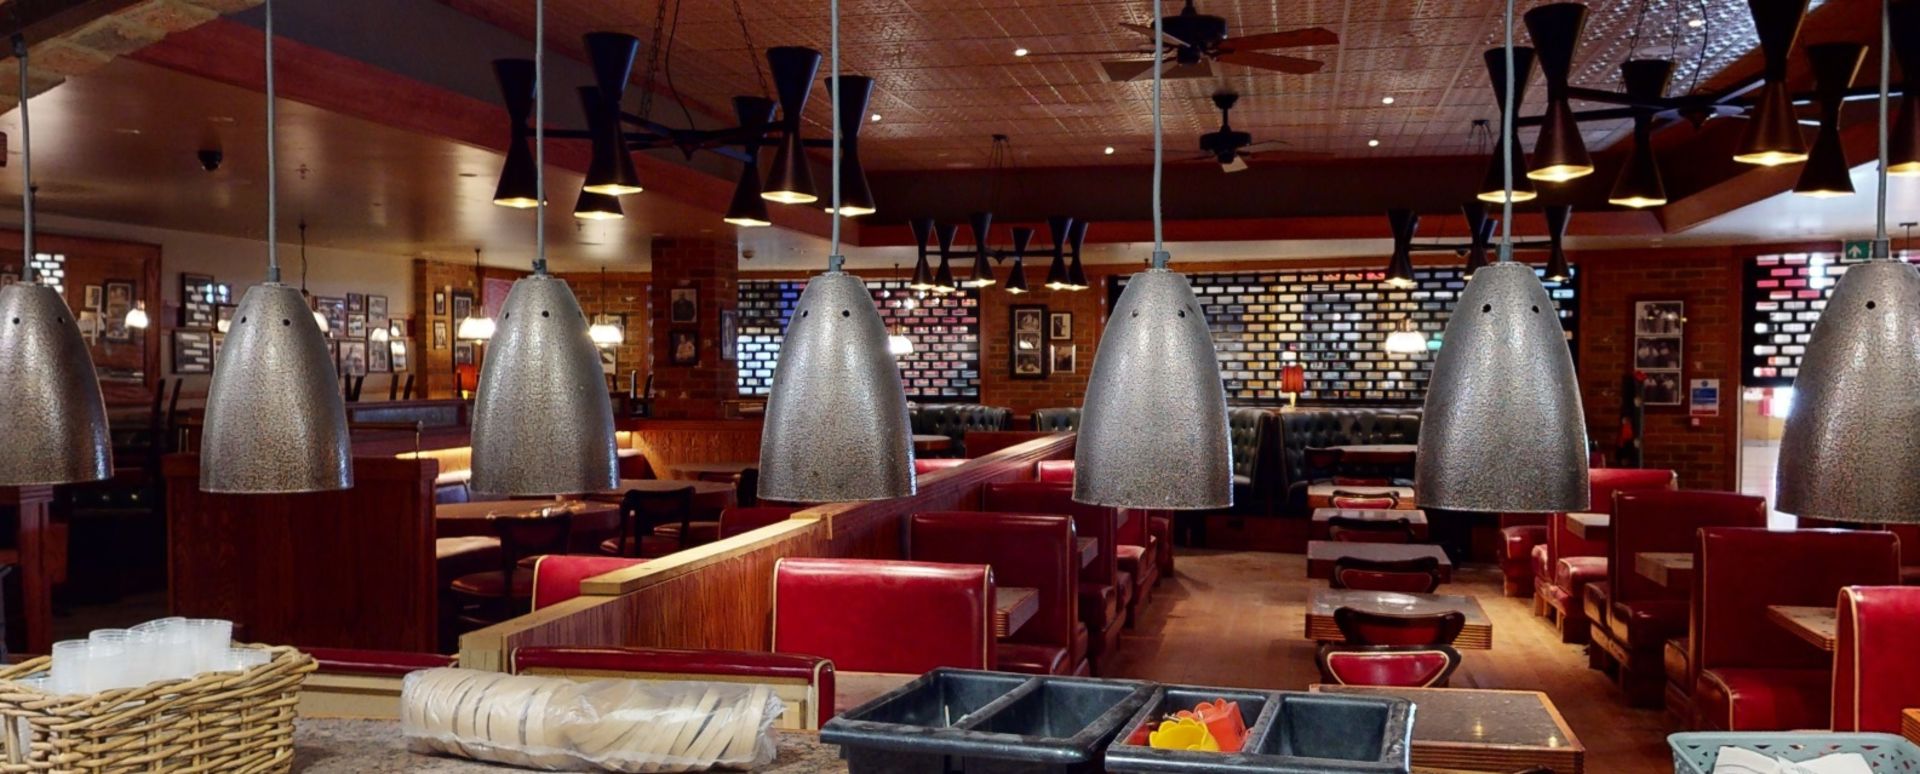 7 x Restaurant Food Warming Heat Lamps On A Curved Mounting Bracket, For Passthrough Server - Image 3 of 3